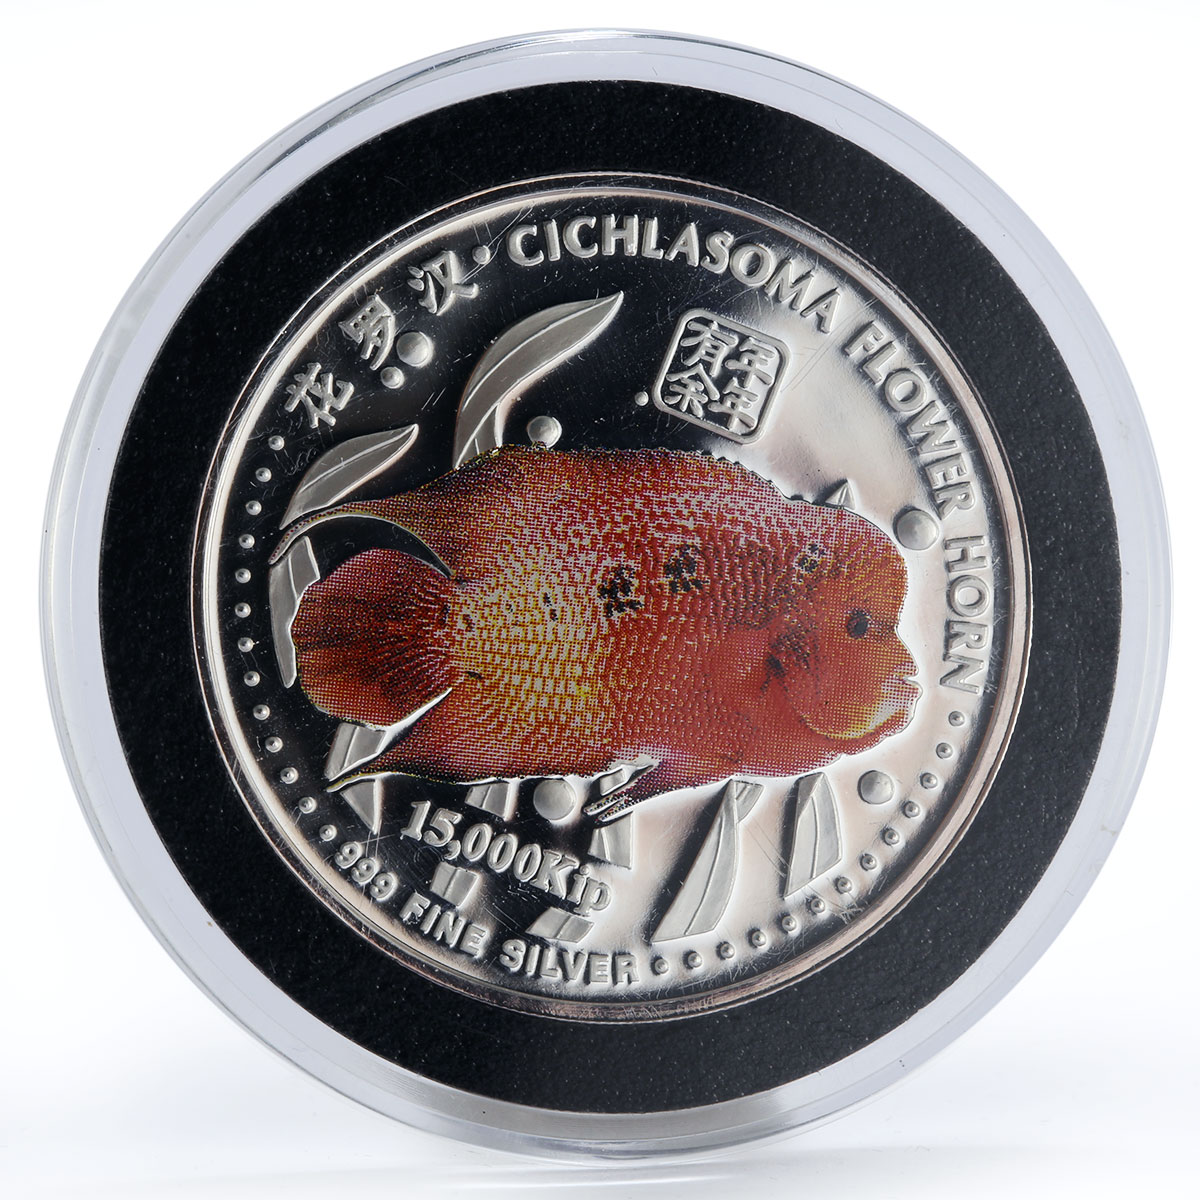 Laos 15000 kip Cichlasoma flower horn fish colored silver proof coin 2003 2004